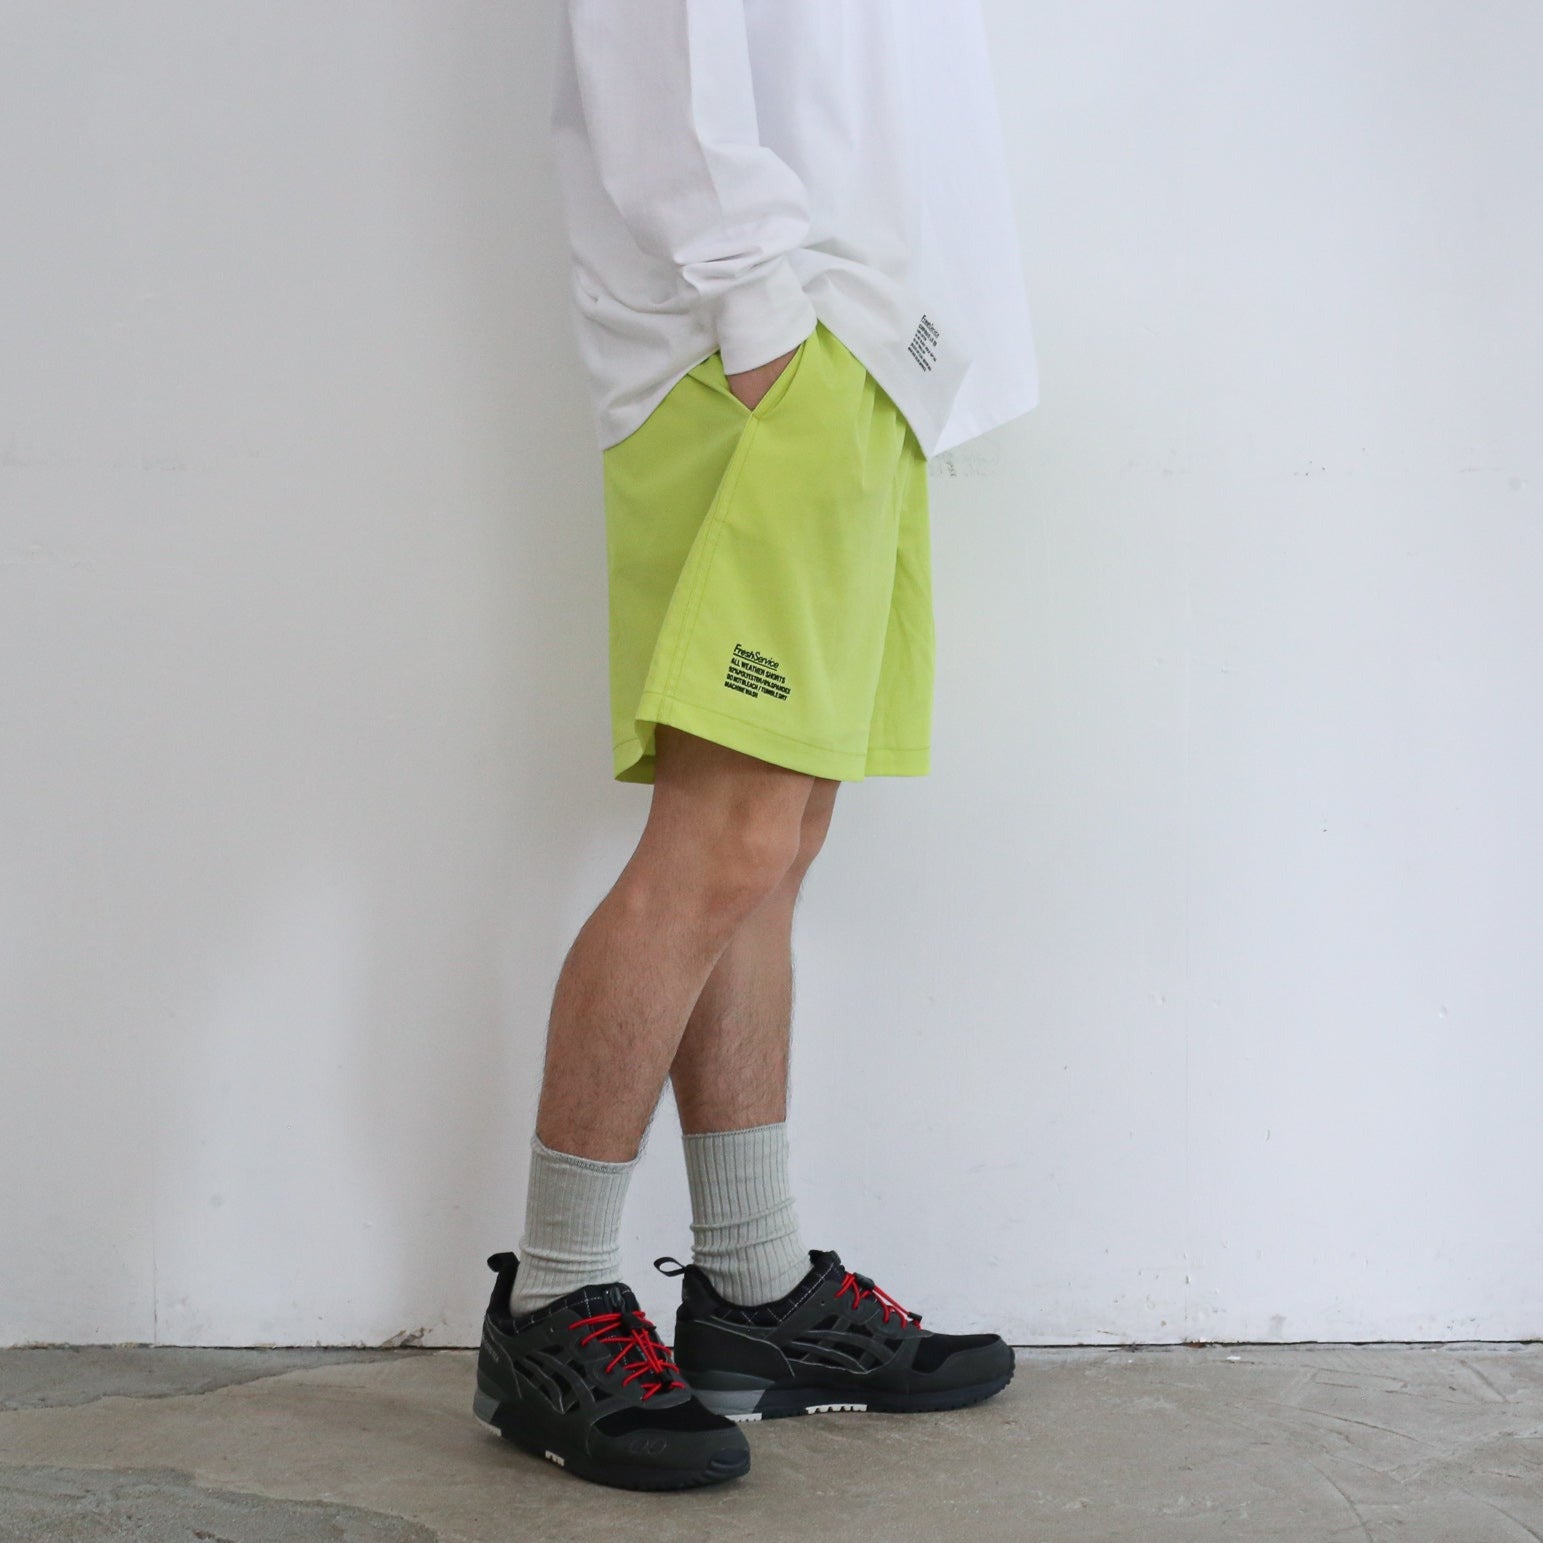 FreshService ALL WEATHER SHORTS 